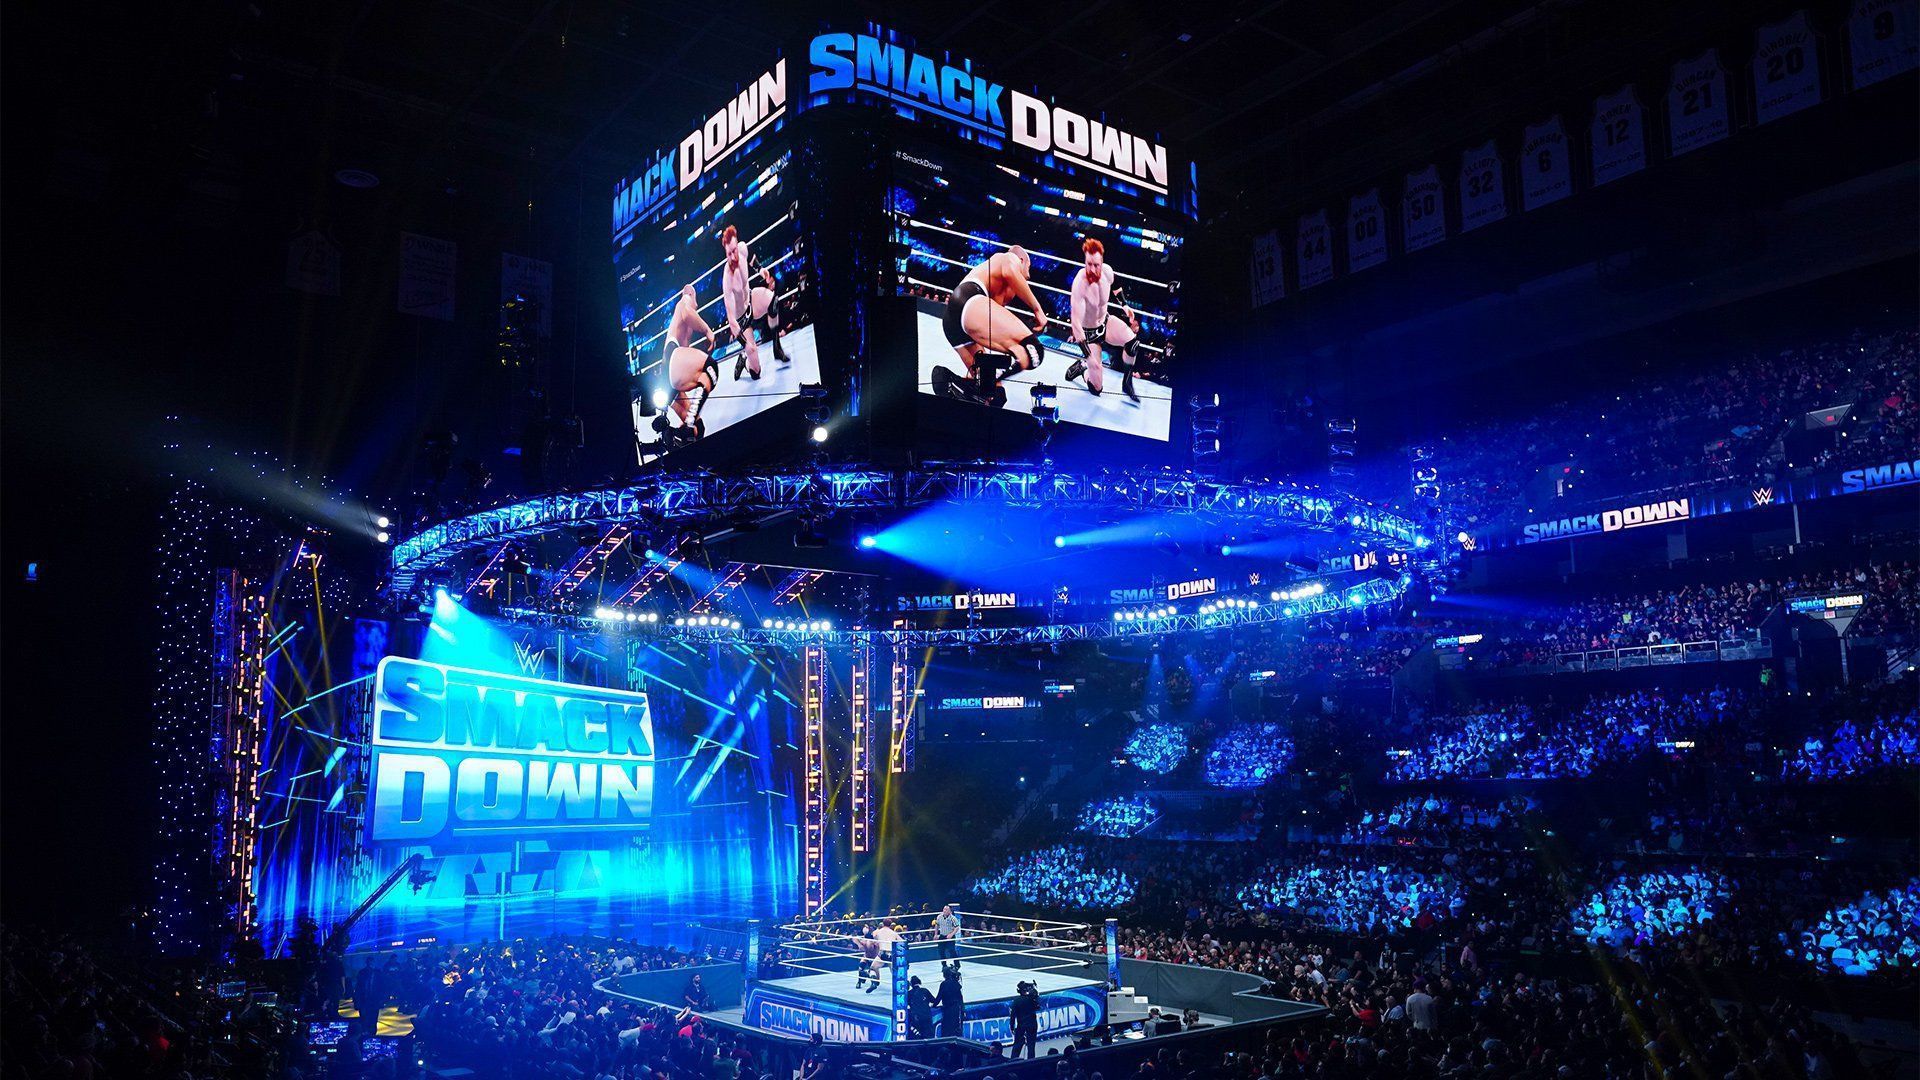 The WWE Universe packs local arena for a live SmackDown